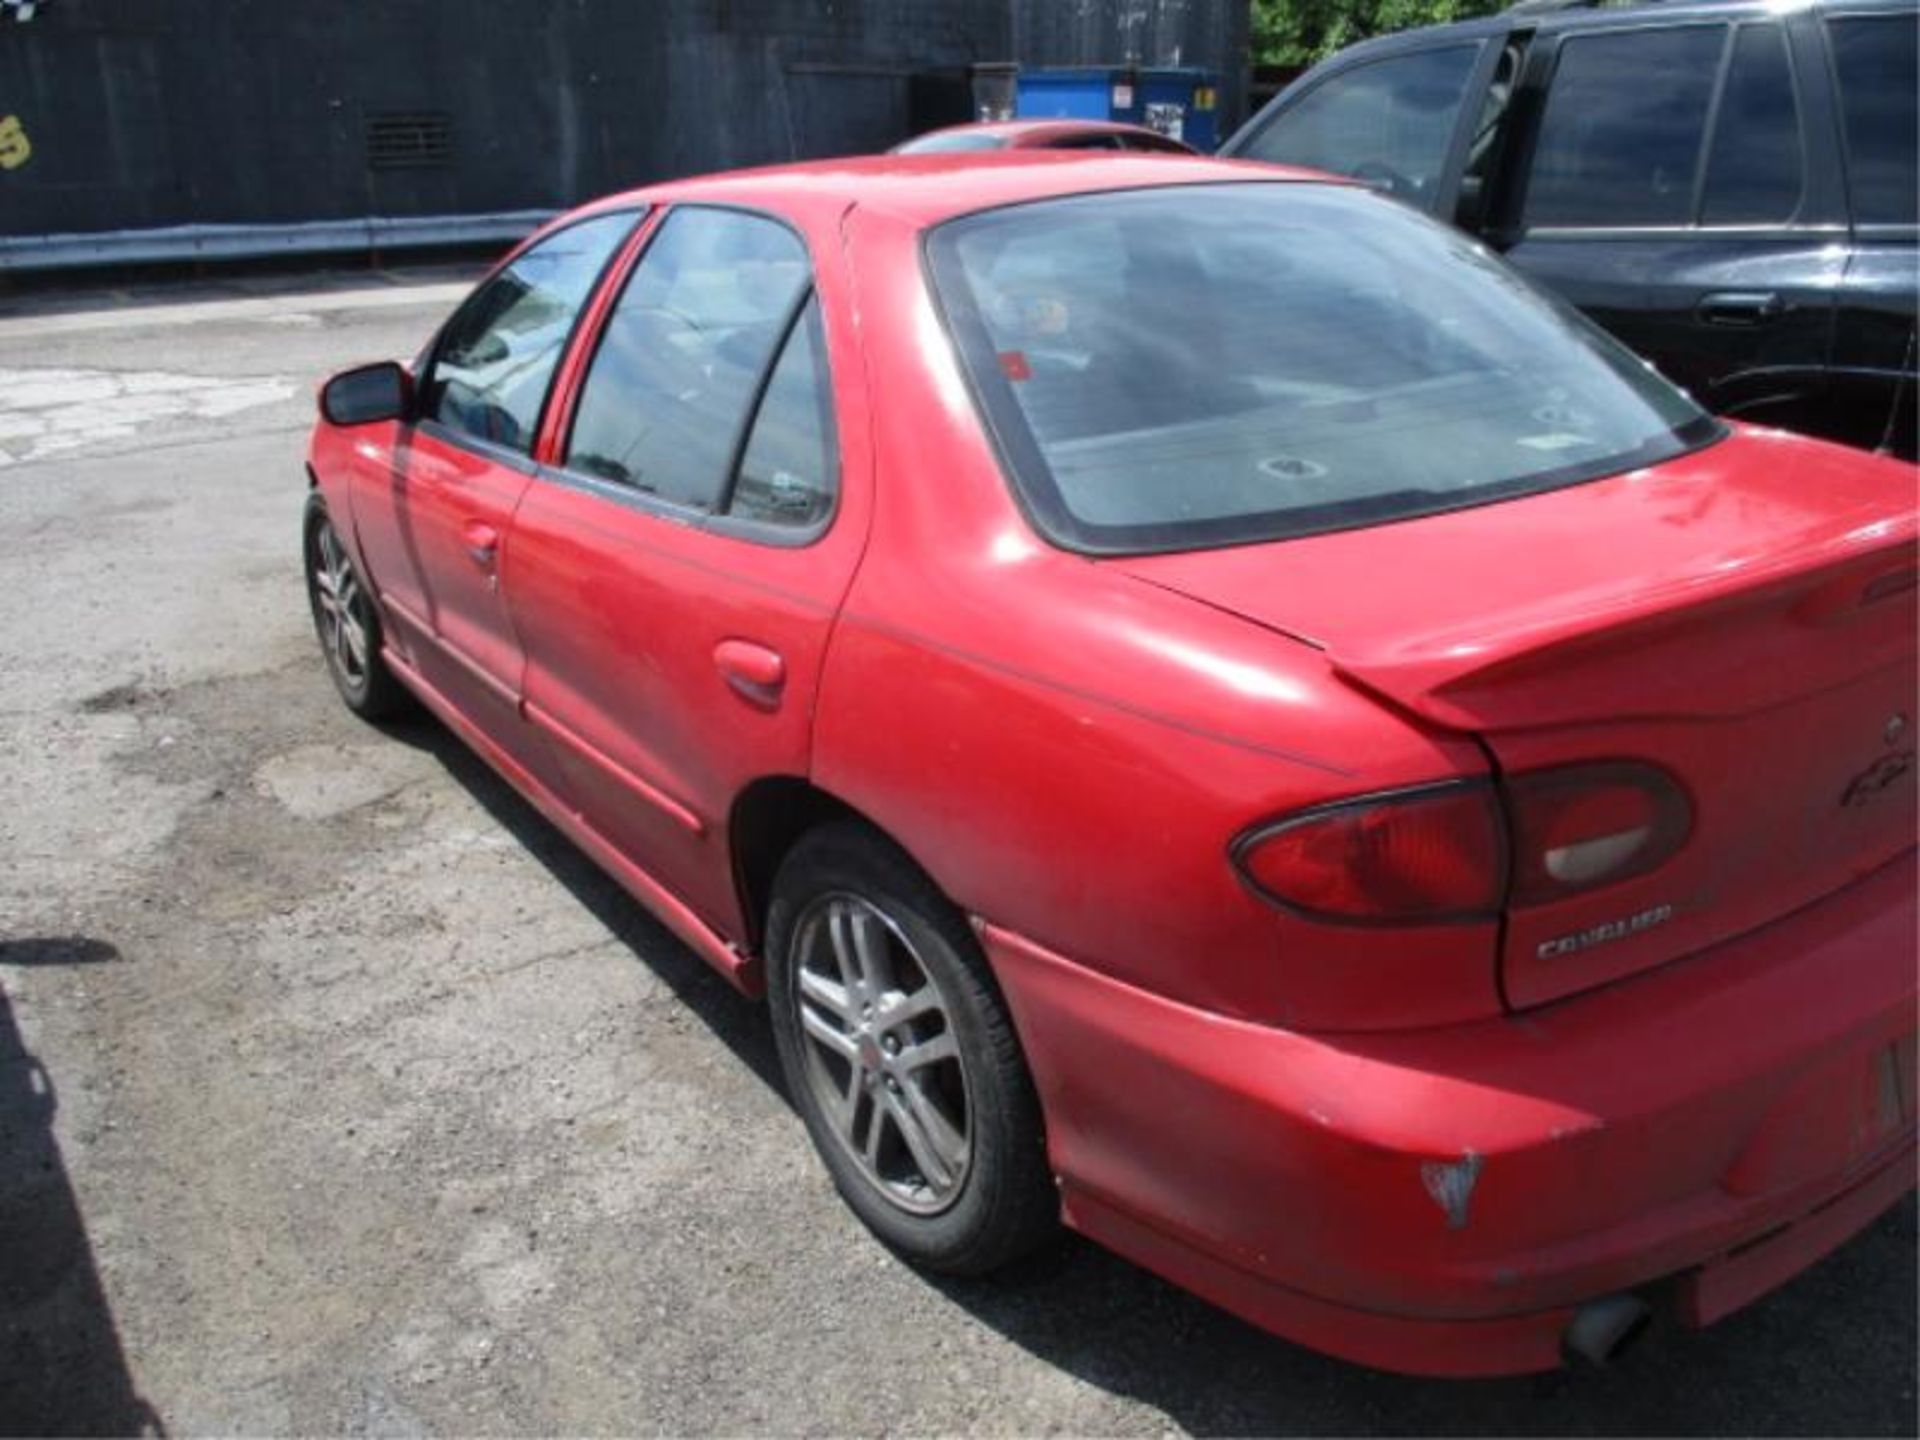 2002 Red Chevy Cavalier VIN:1G1JH52F227344735 - Image 5 of 13